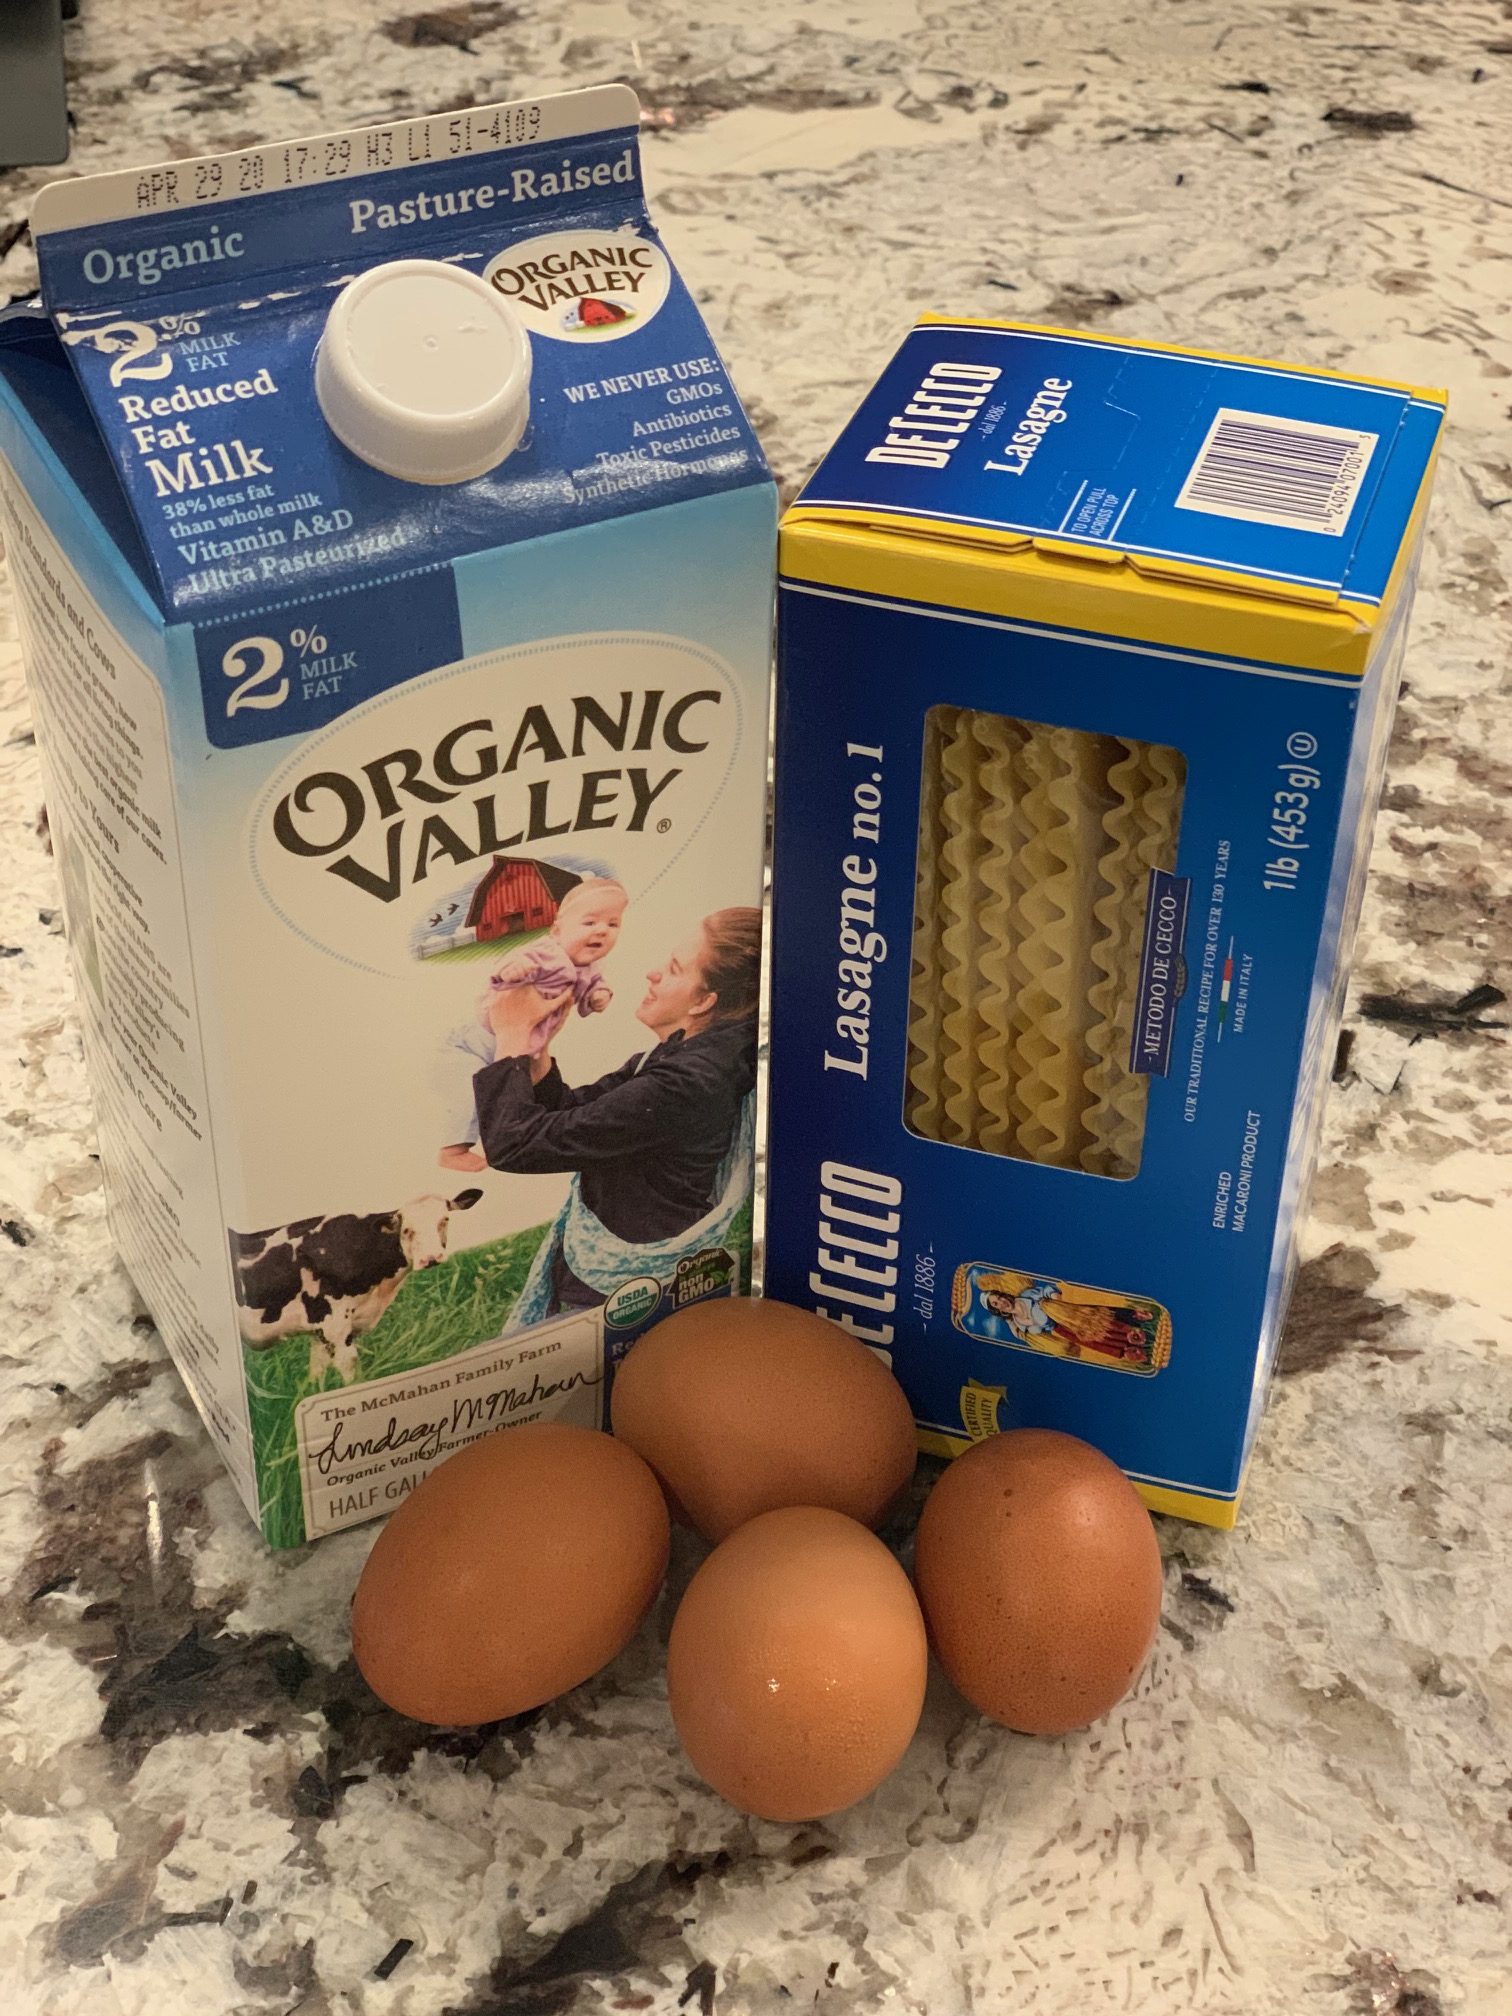 Gluten, dairy, and eggs